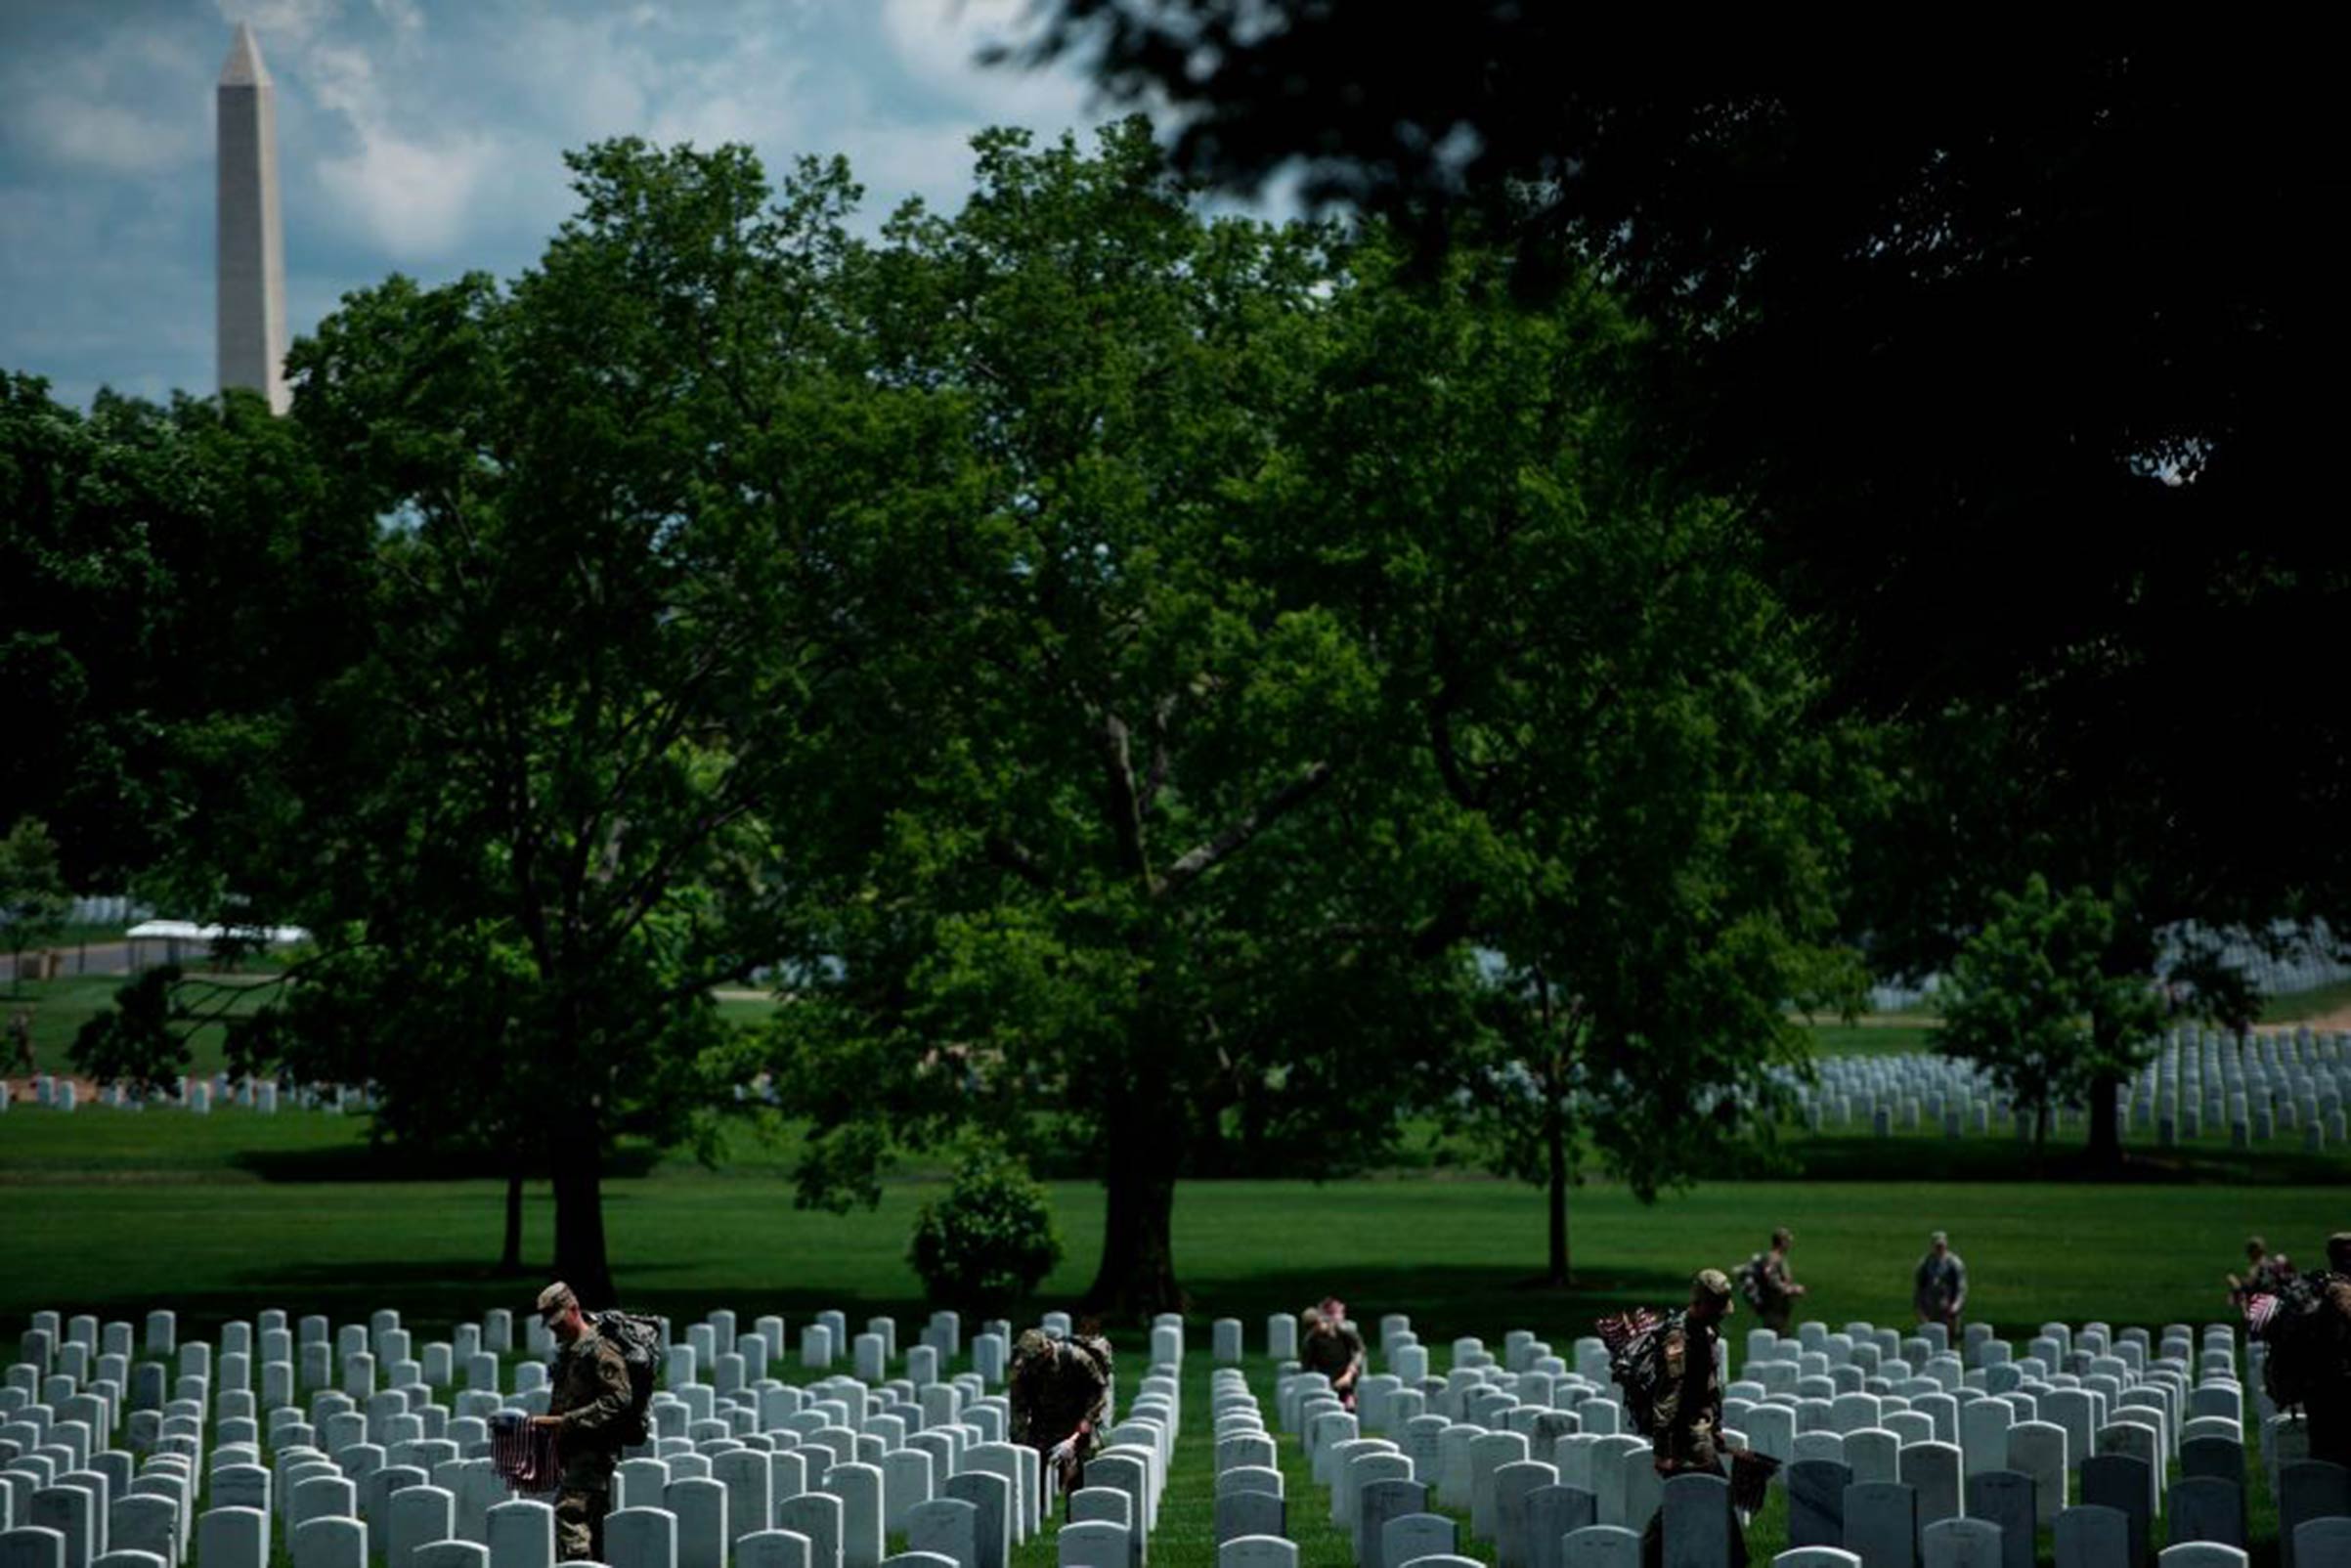 Soldiers in the Old Guard place flags at graves in Arlington National Cemetery during "Flags In" in preparation for Memorial Day May 25, 2017, in Arlington, Virginia. (Brendan Smialowski/AFP—Getty Images)